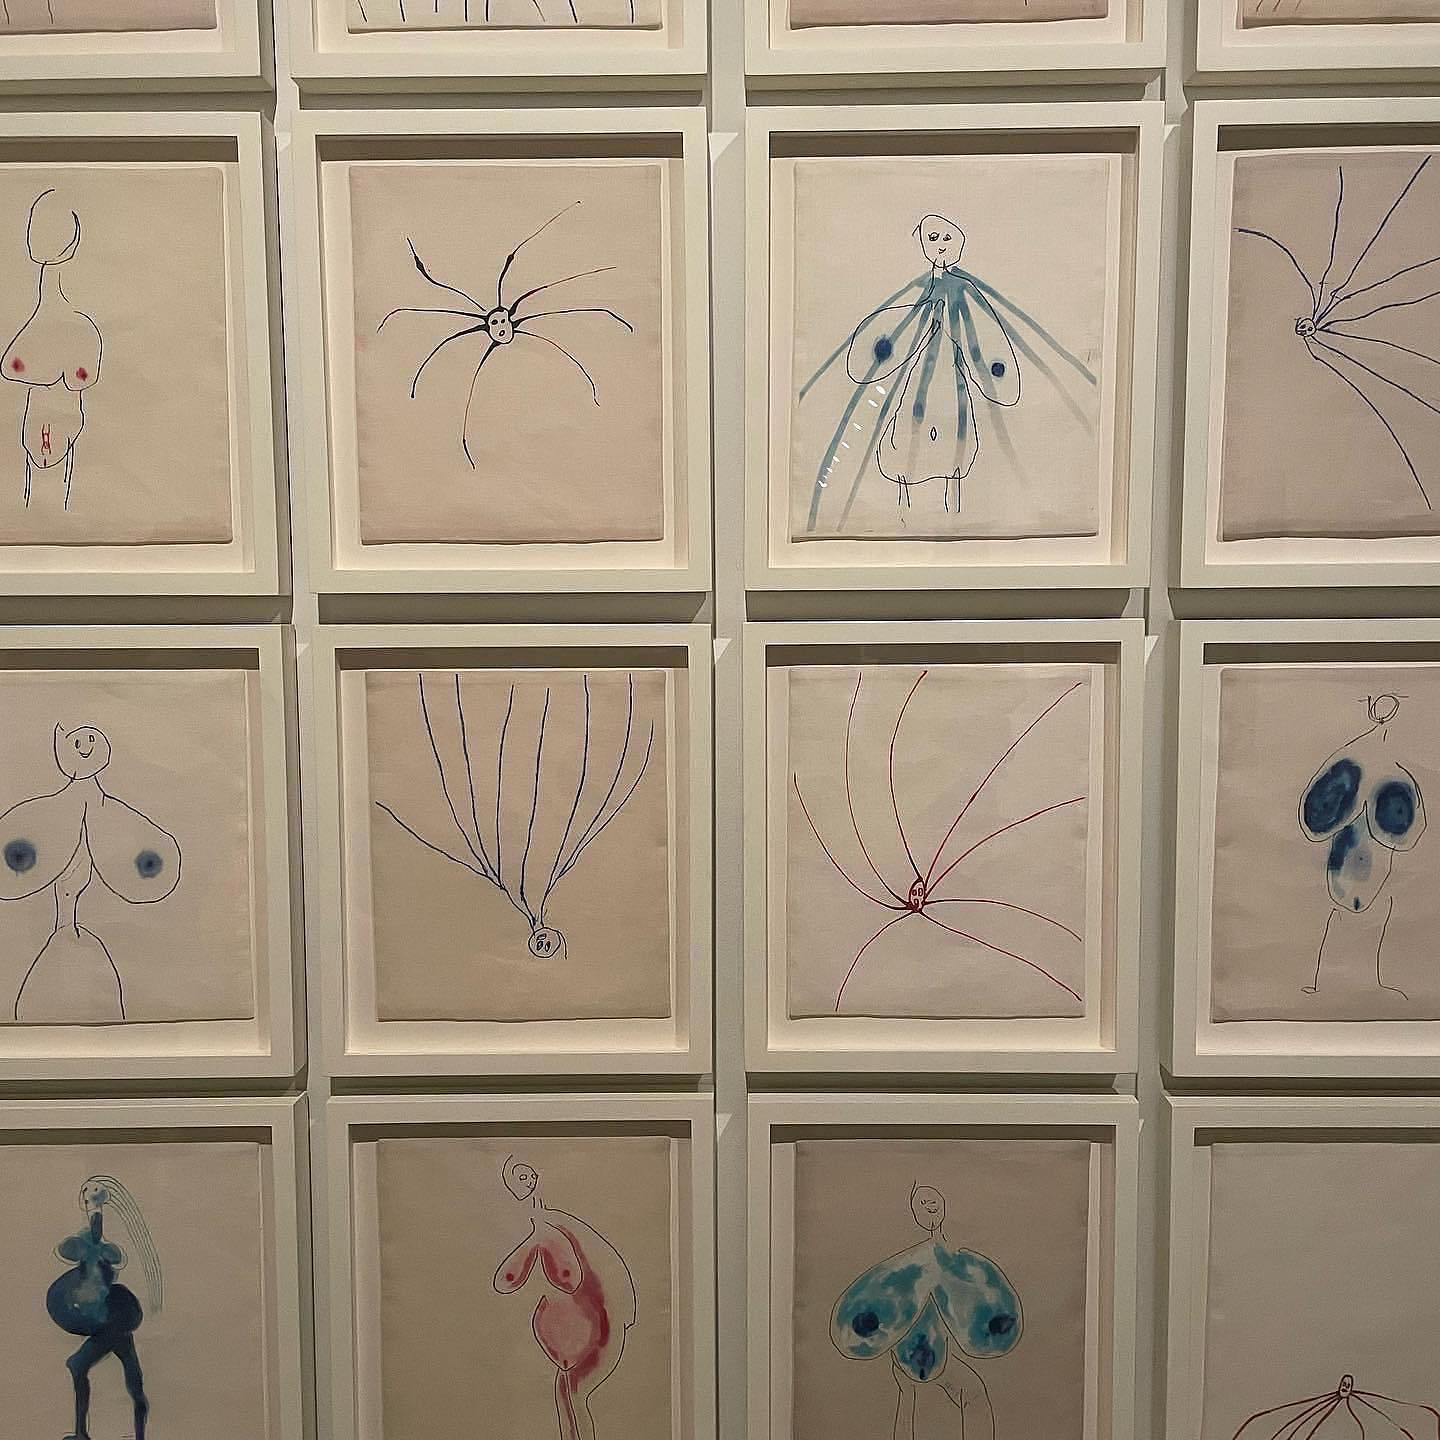 Everything You Should Know About Louise Bourgeois's Textile Art